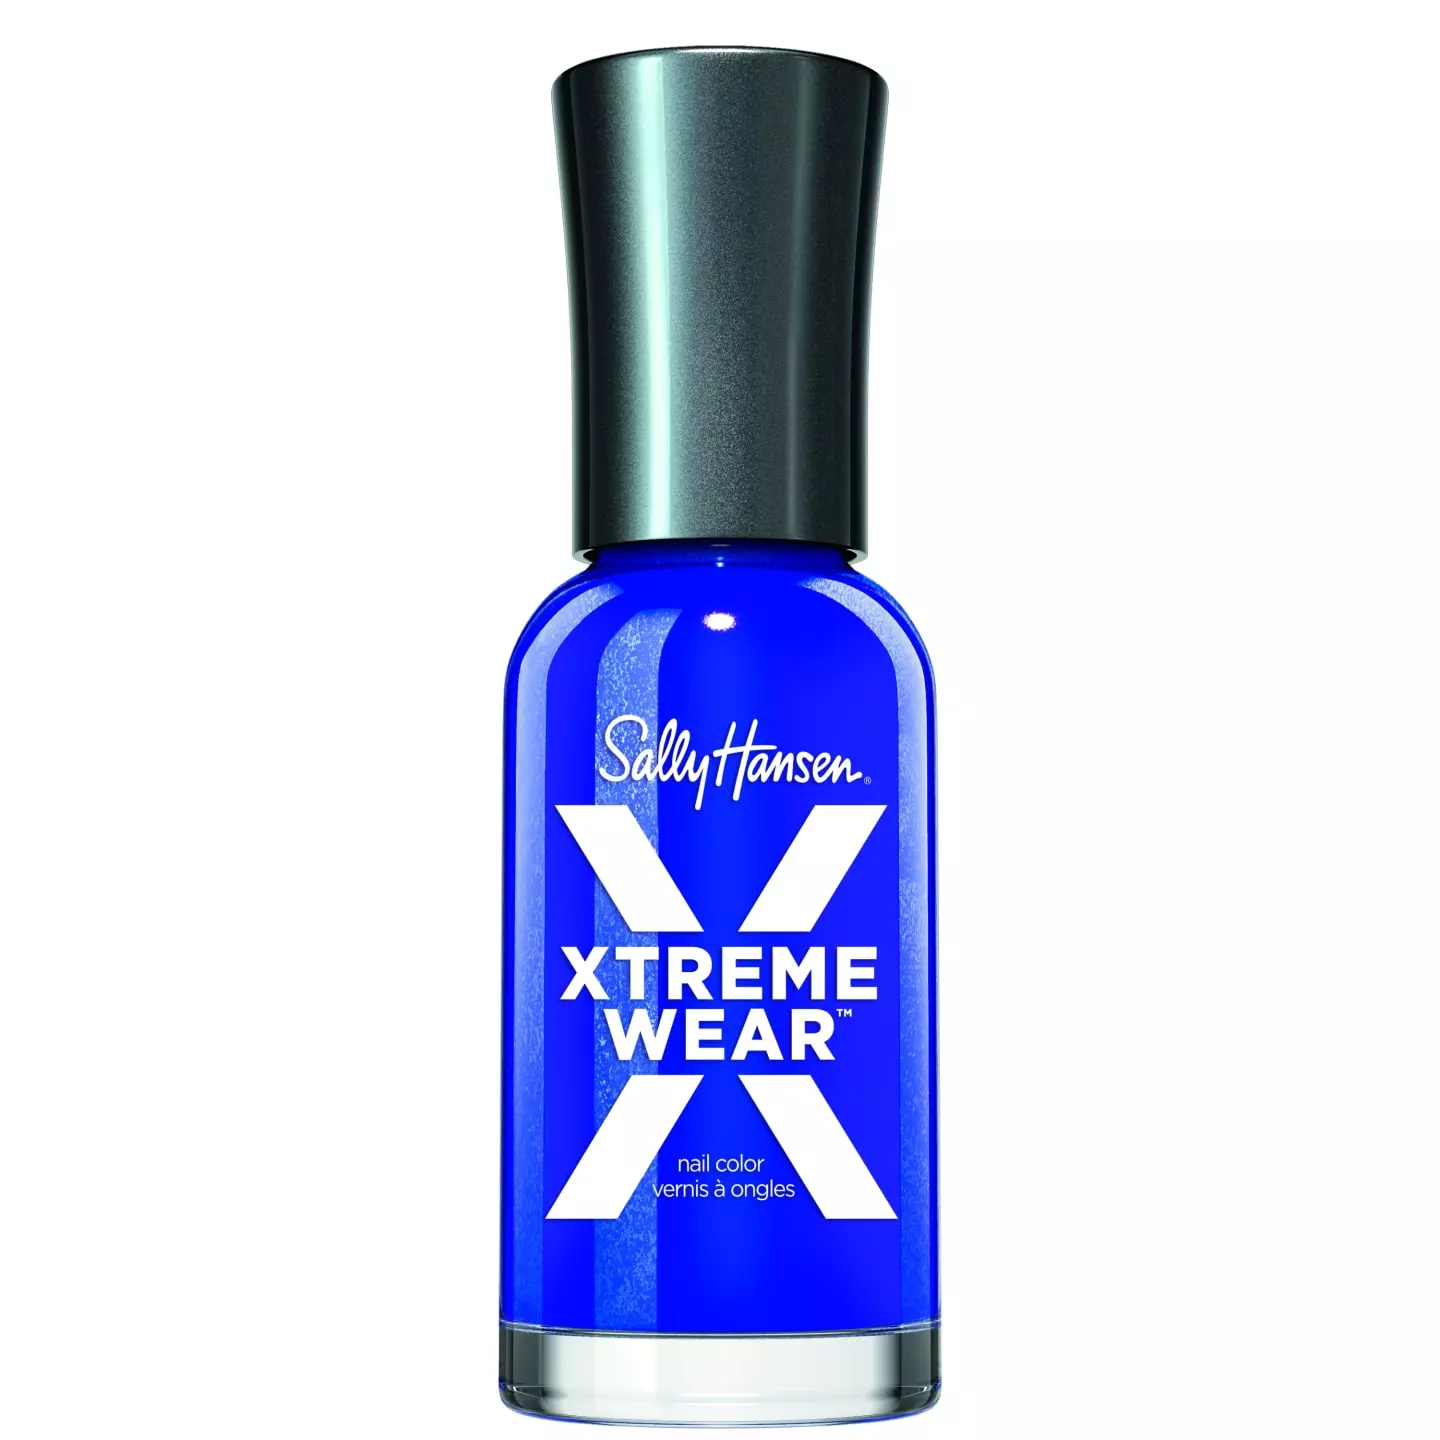 Sally Hansen Hard as Nails Xtreme Wear, Pacific Blue, 0.4 Fluid Ounce 0.4 Fl Oz (Pack of 1) Pacific Blue